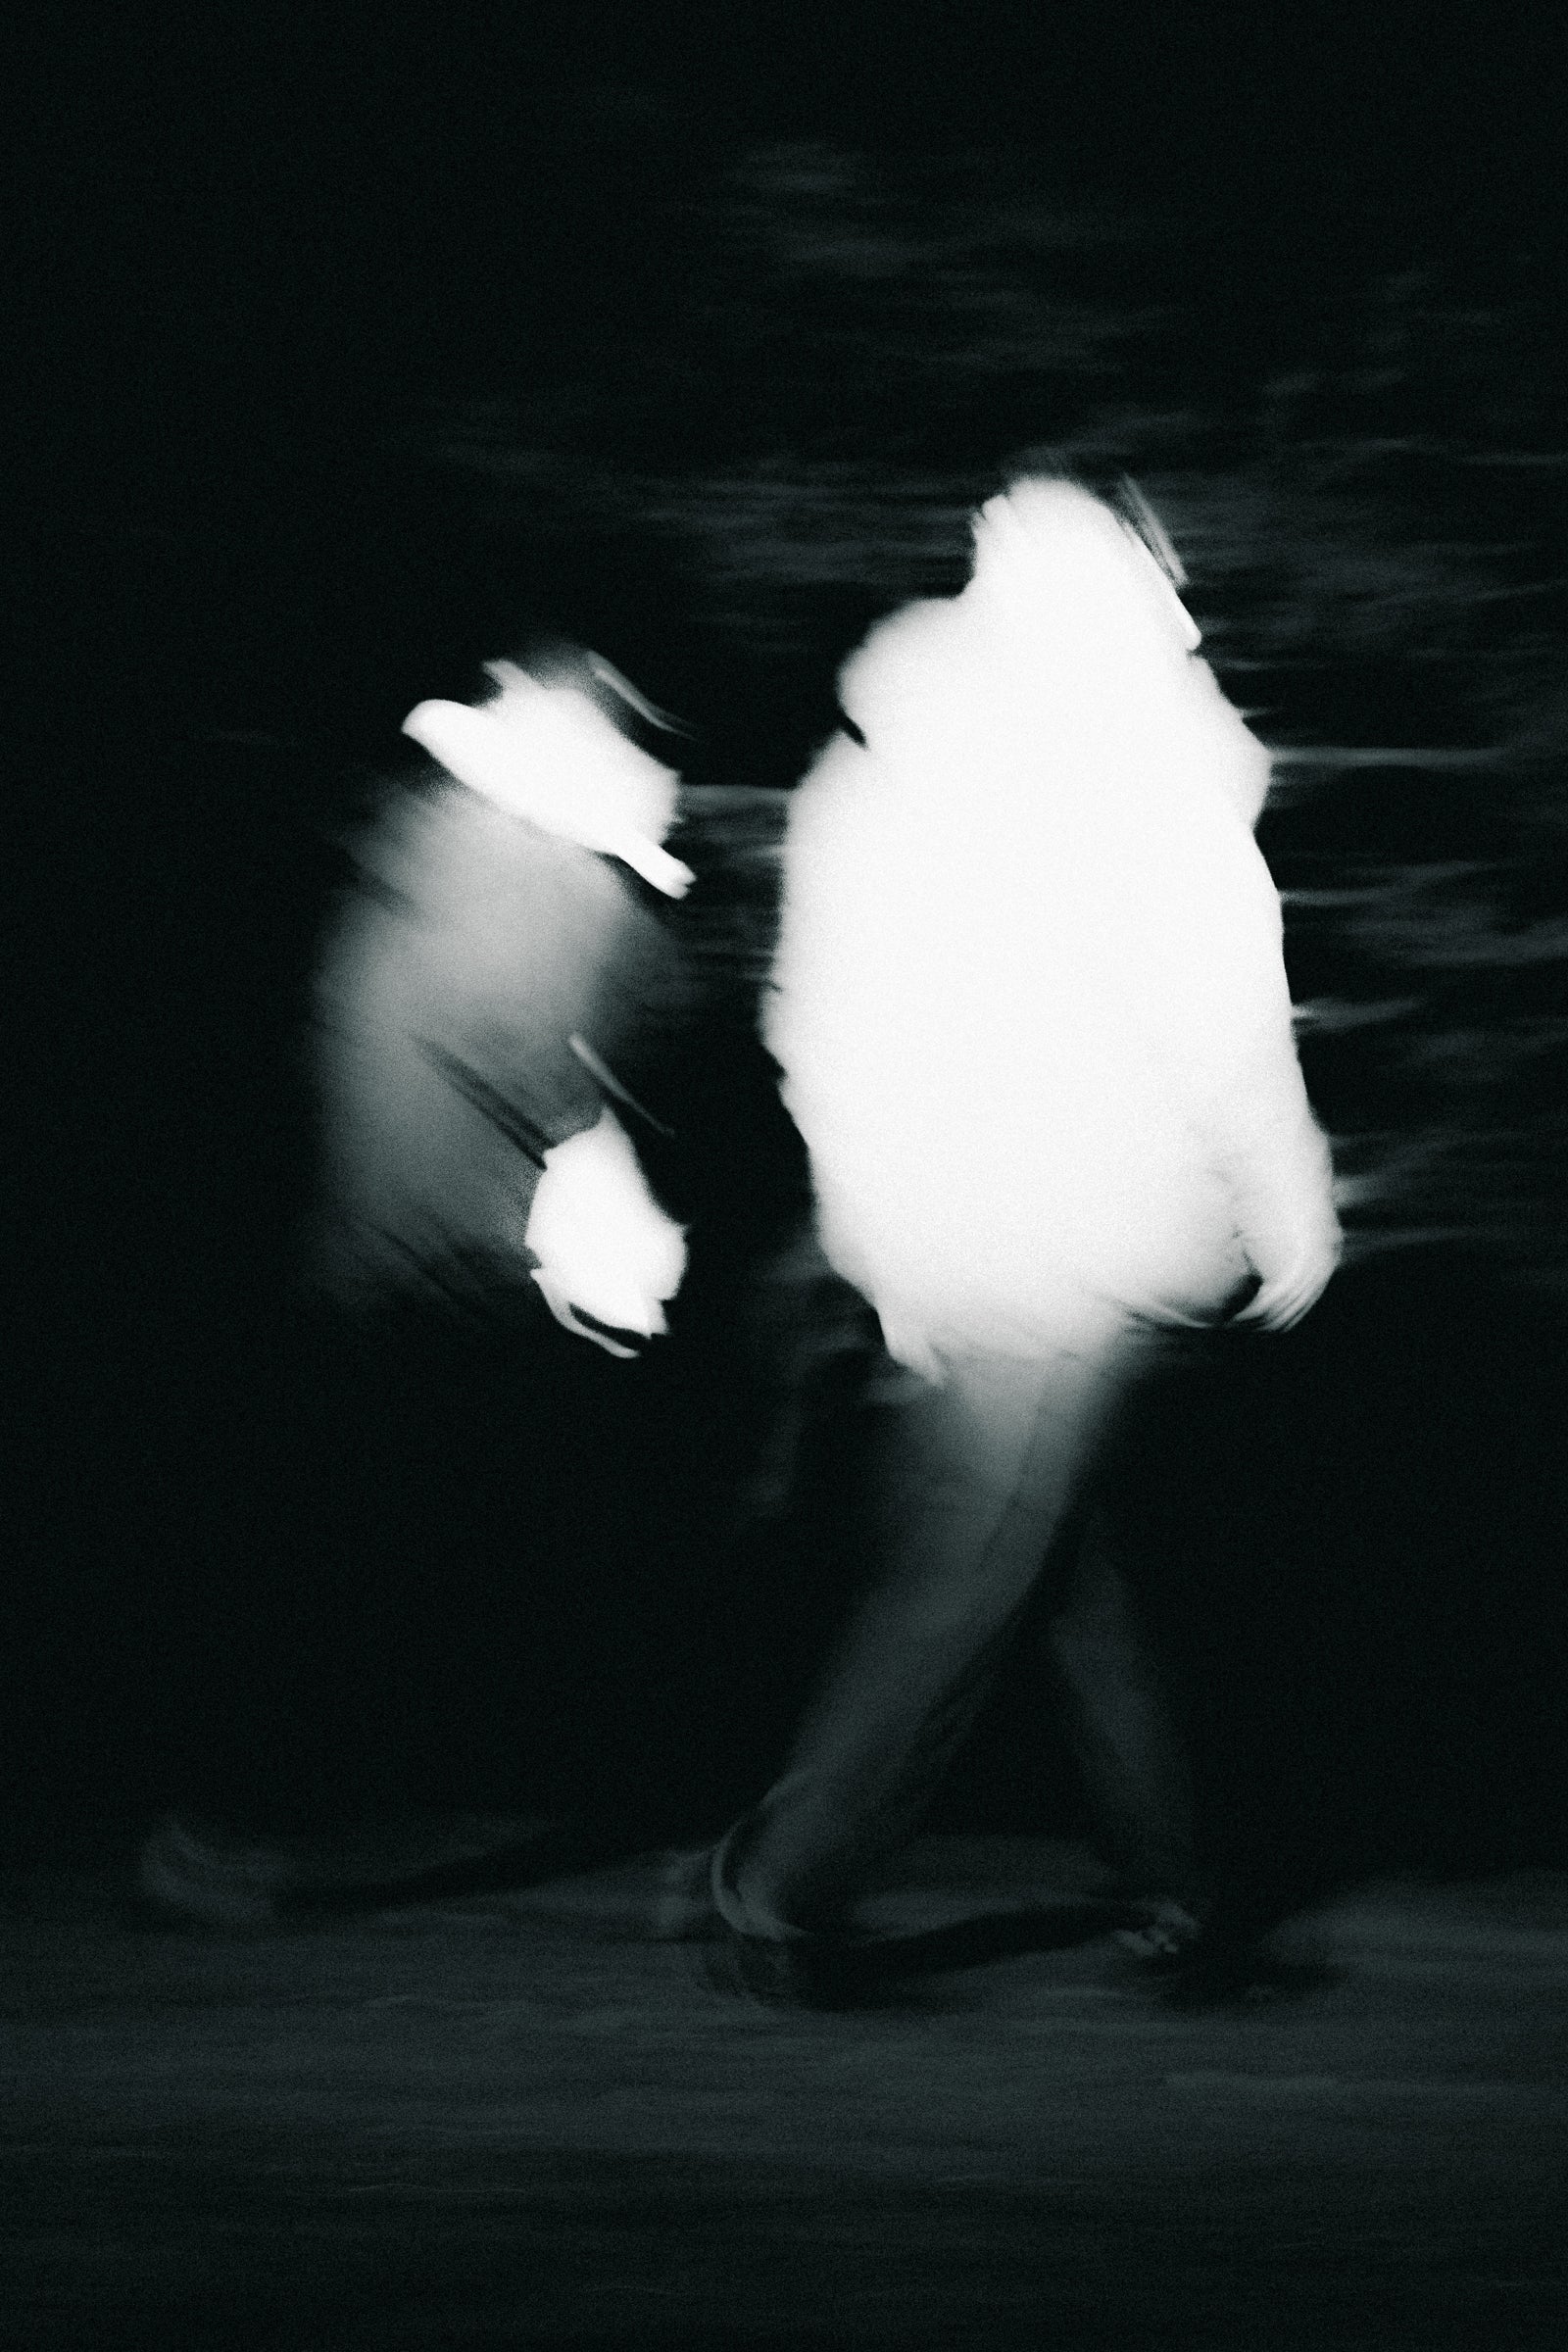 Two hikers, photographed at night whilst hiking in head torches.